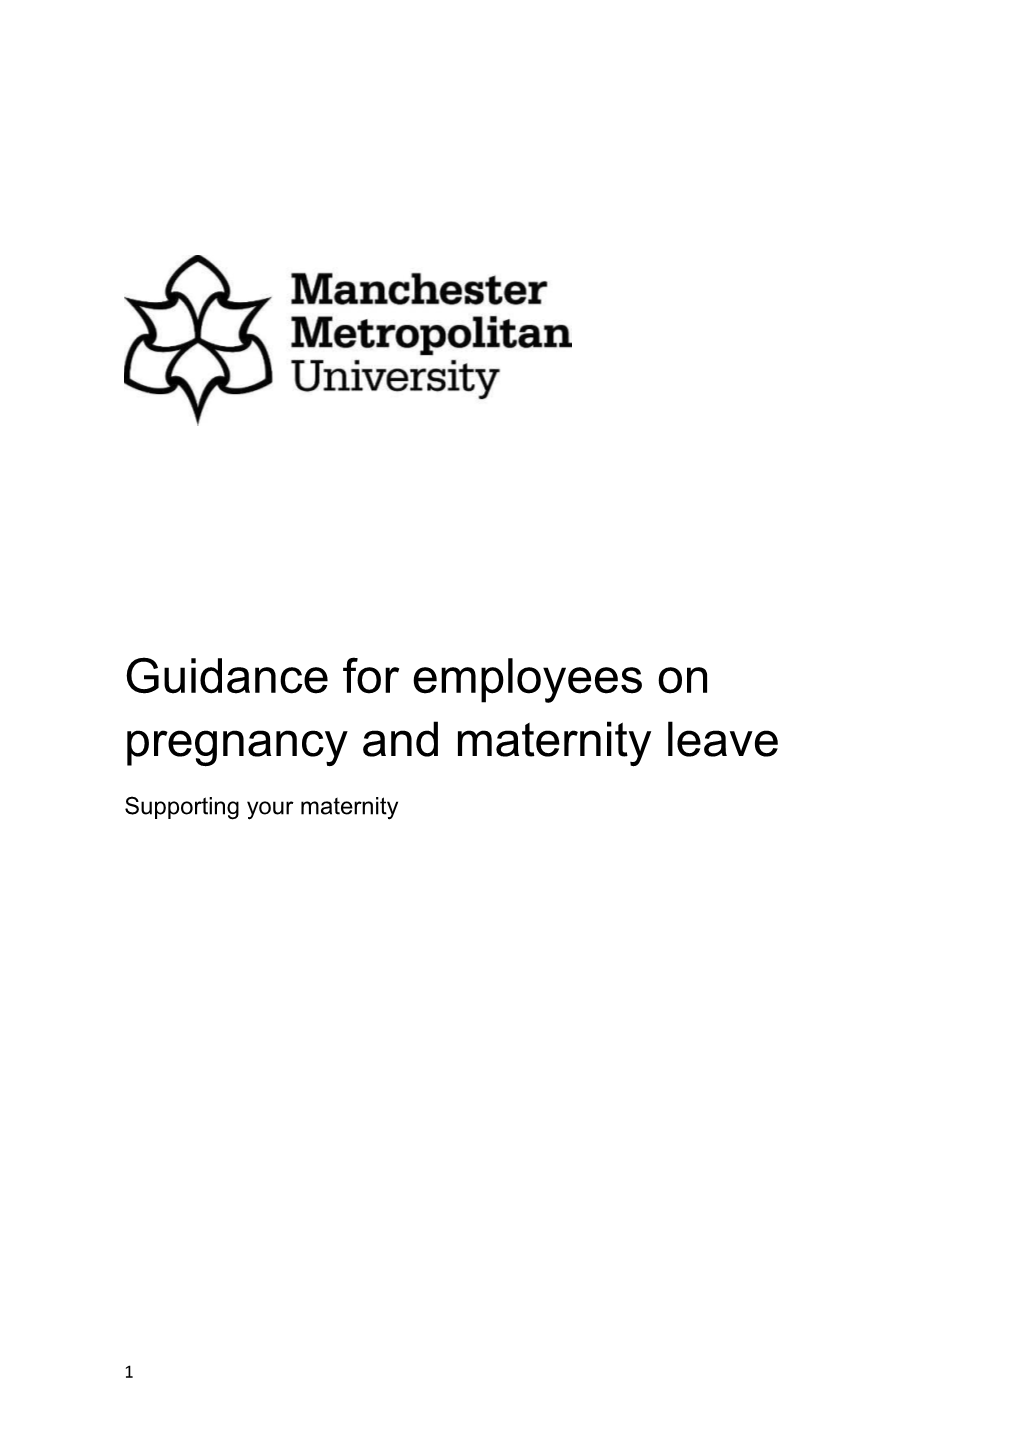 Guidance for Employees on Pregnancy and Maternity Leave